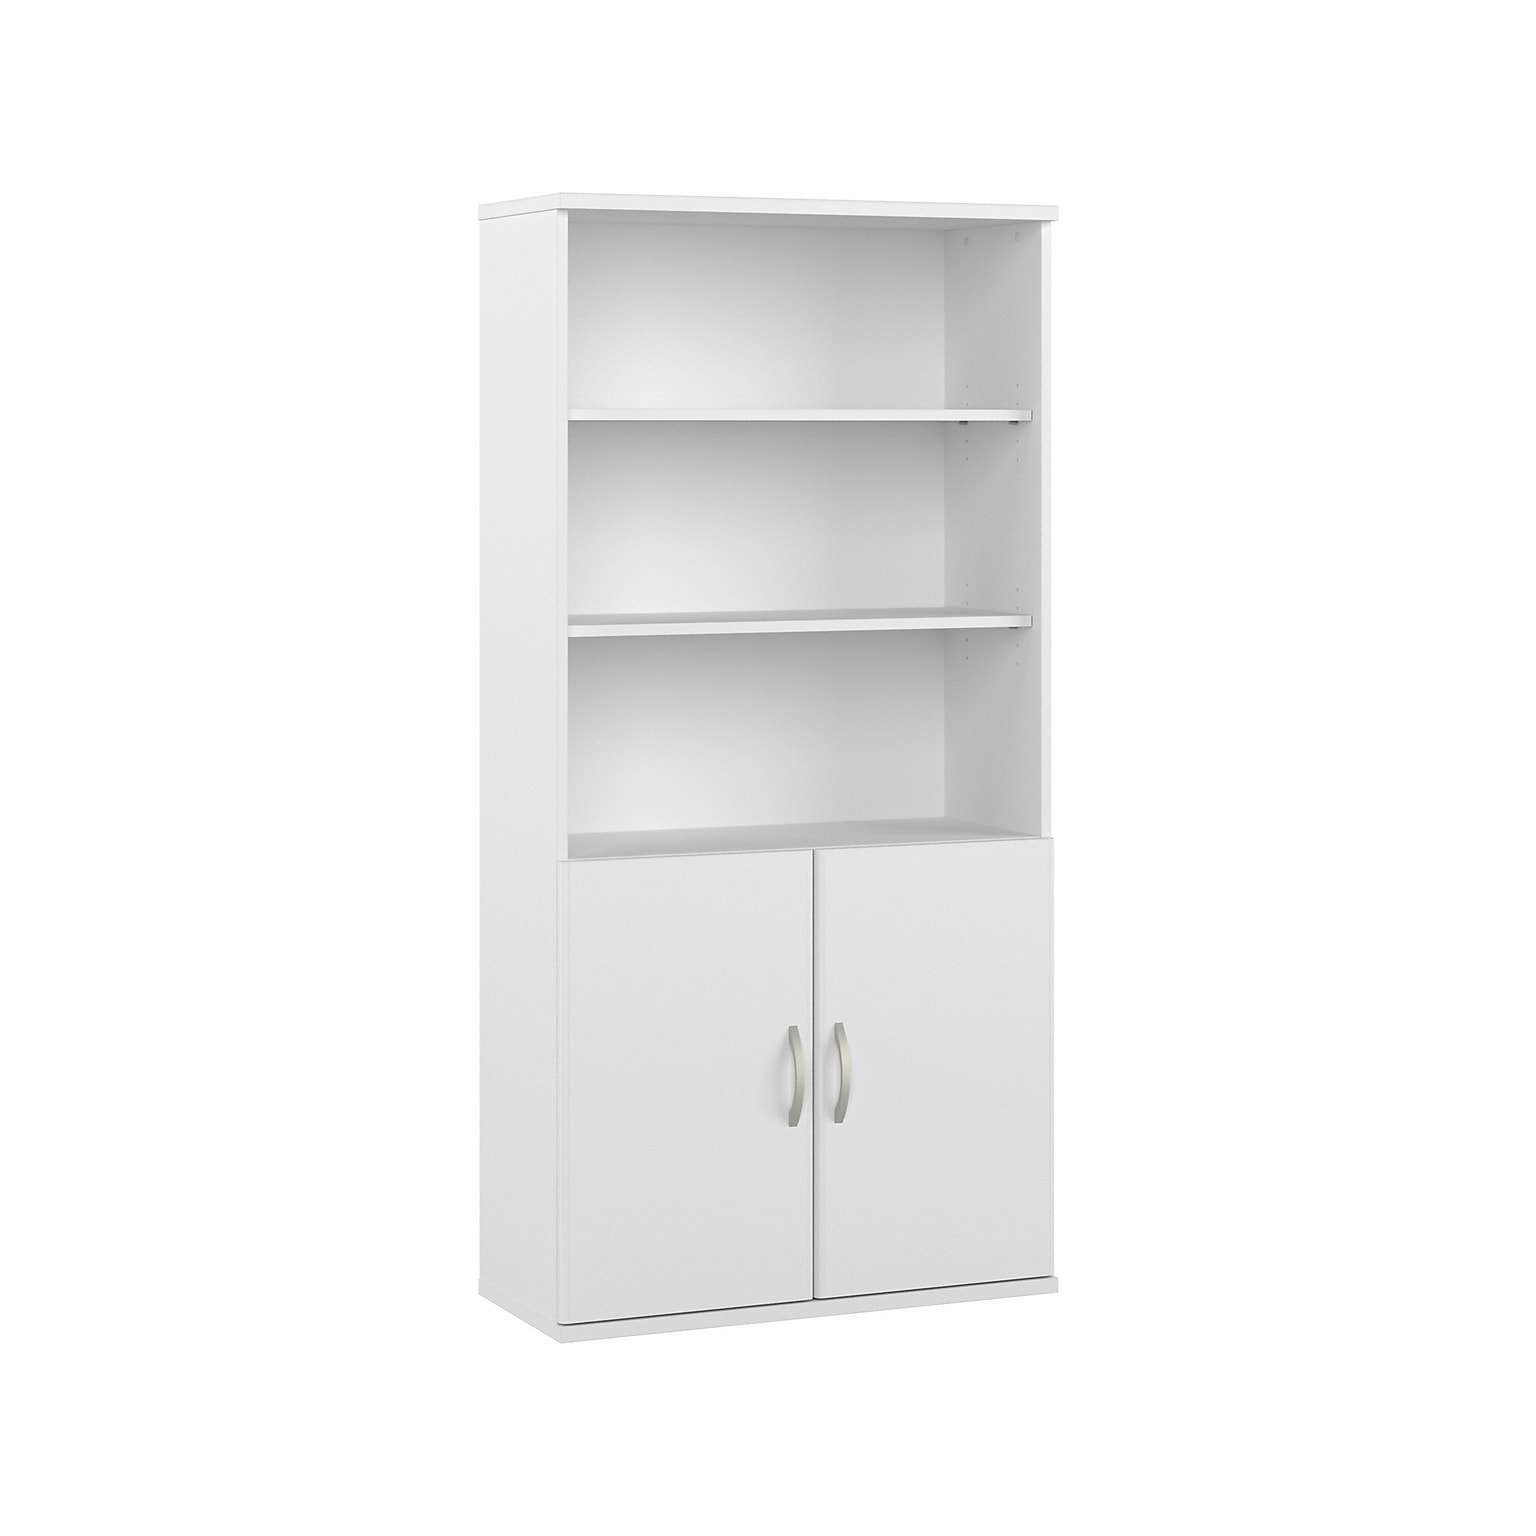 Bush Business Furniture Studio A 73H 5-Shelf Bookcase with Adjustable Shelves, White Laminated Wood (STA010WH)